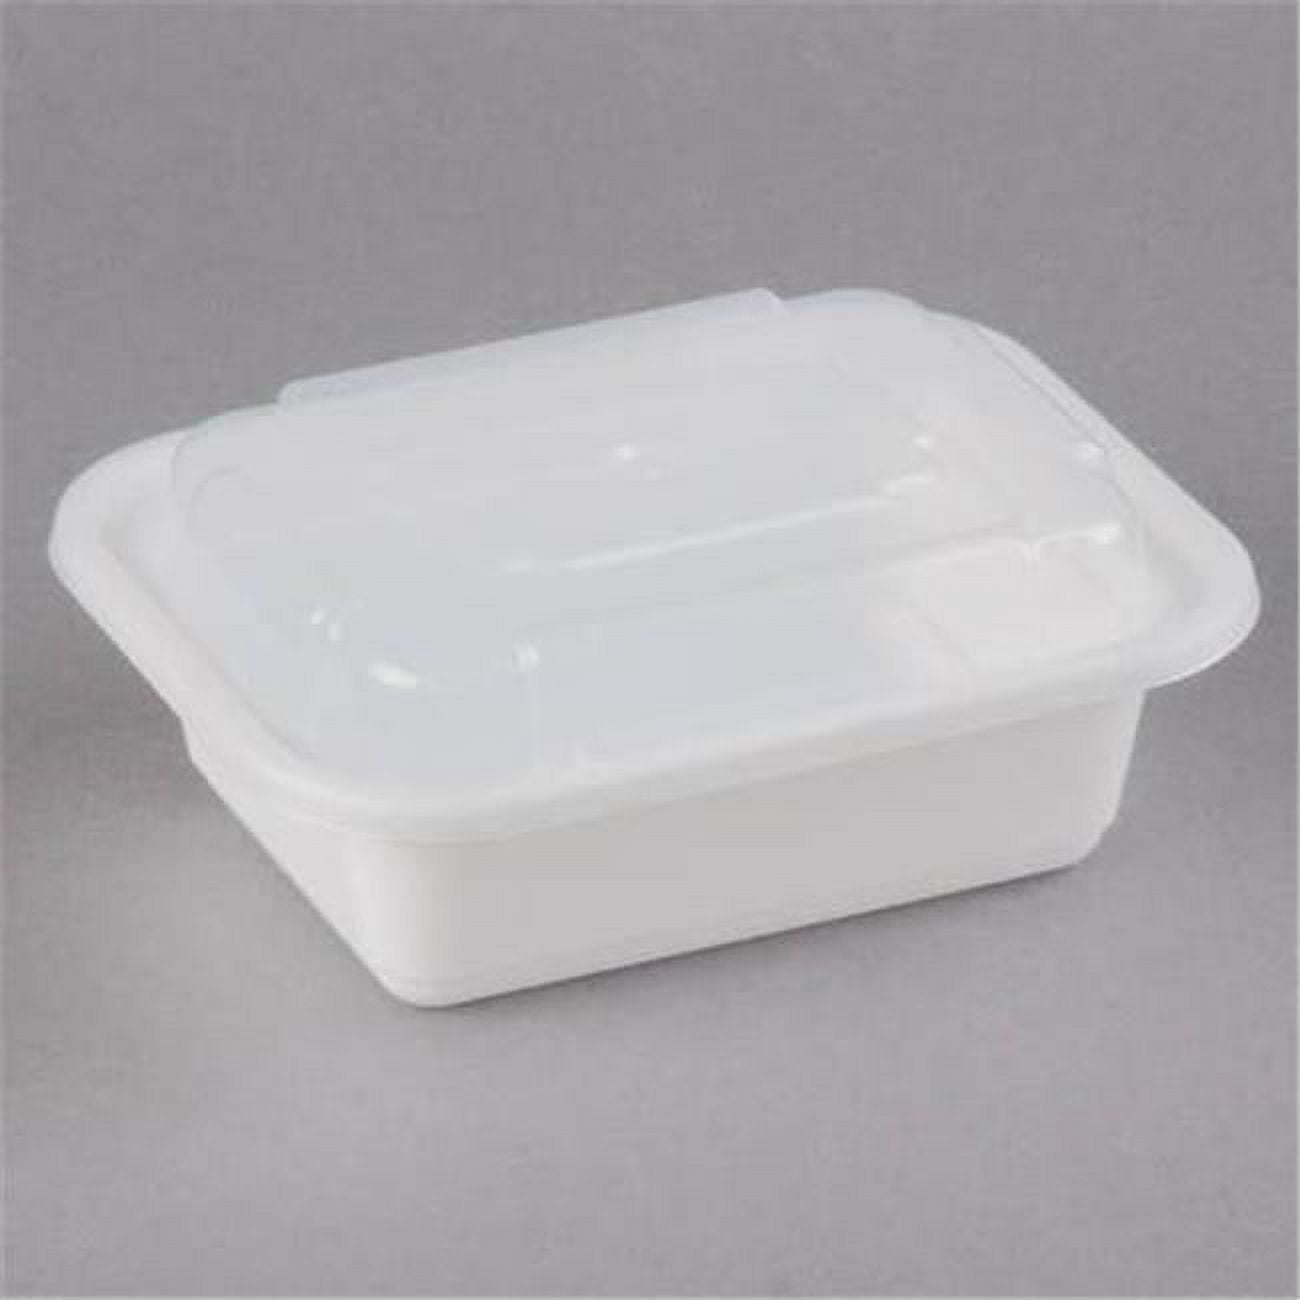 Nc818 Cpc 12 Oz White Rectangular Container With Lid - Case Of 150